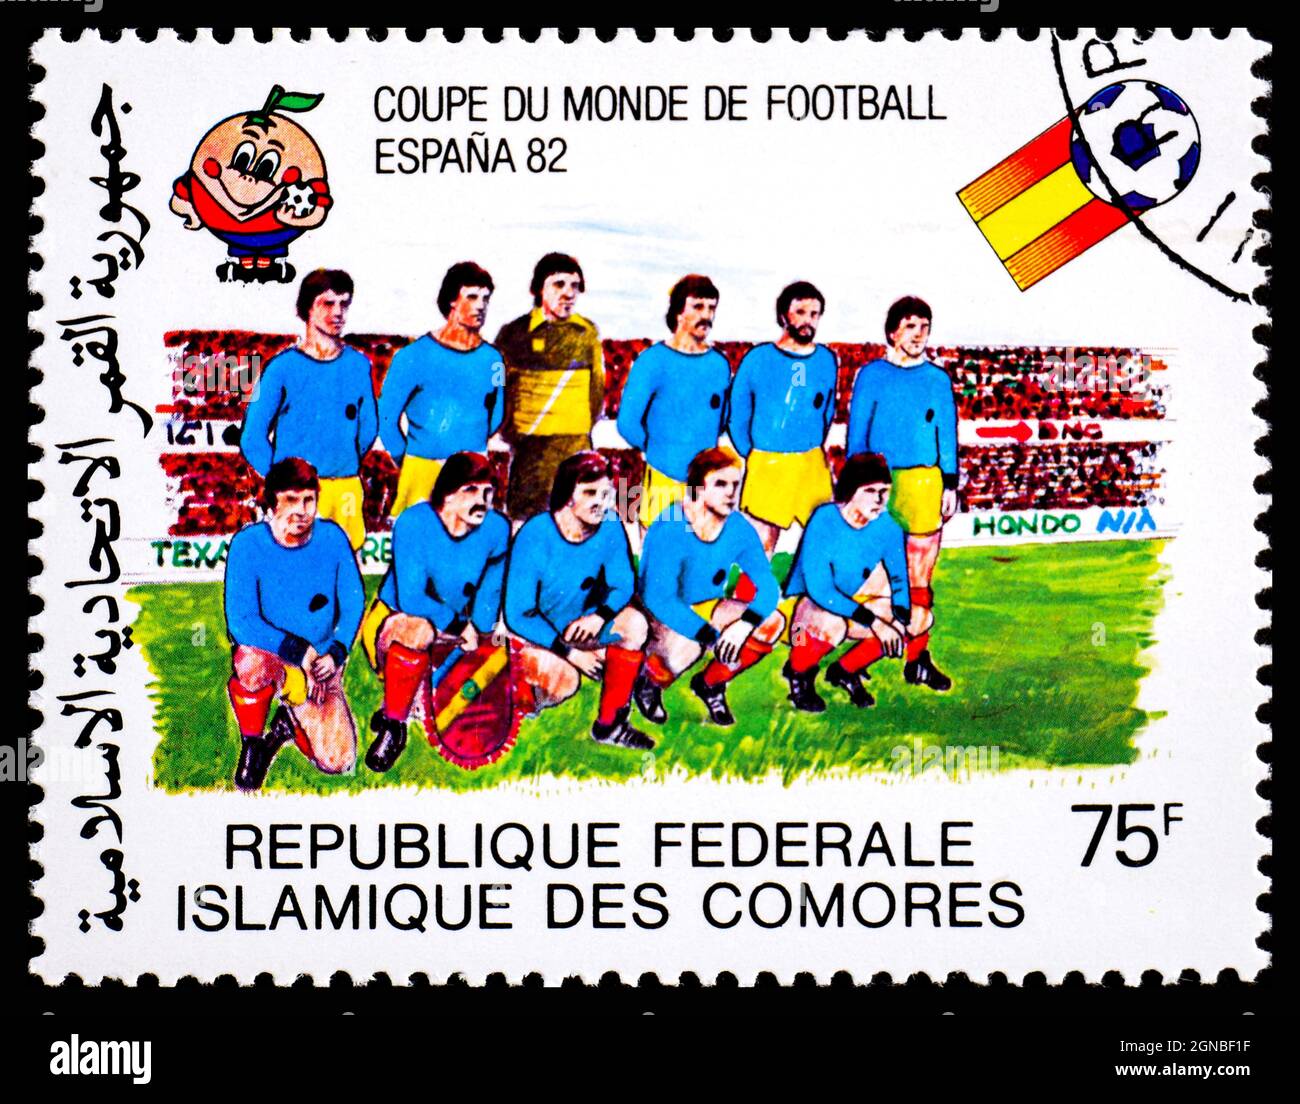 SPAIN - CIRCA 1982: A postage stamp from Spain showing Coupe Du Monde De Football Espana 1982 Stock Photo